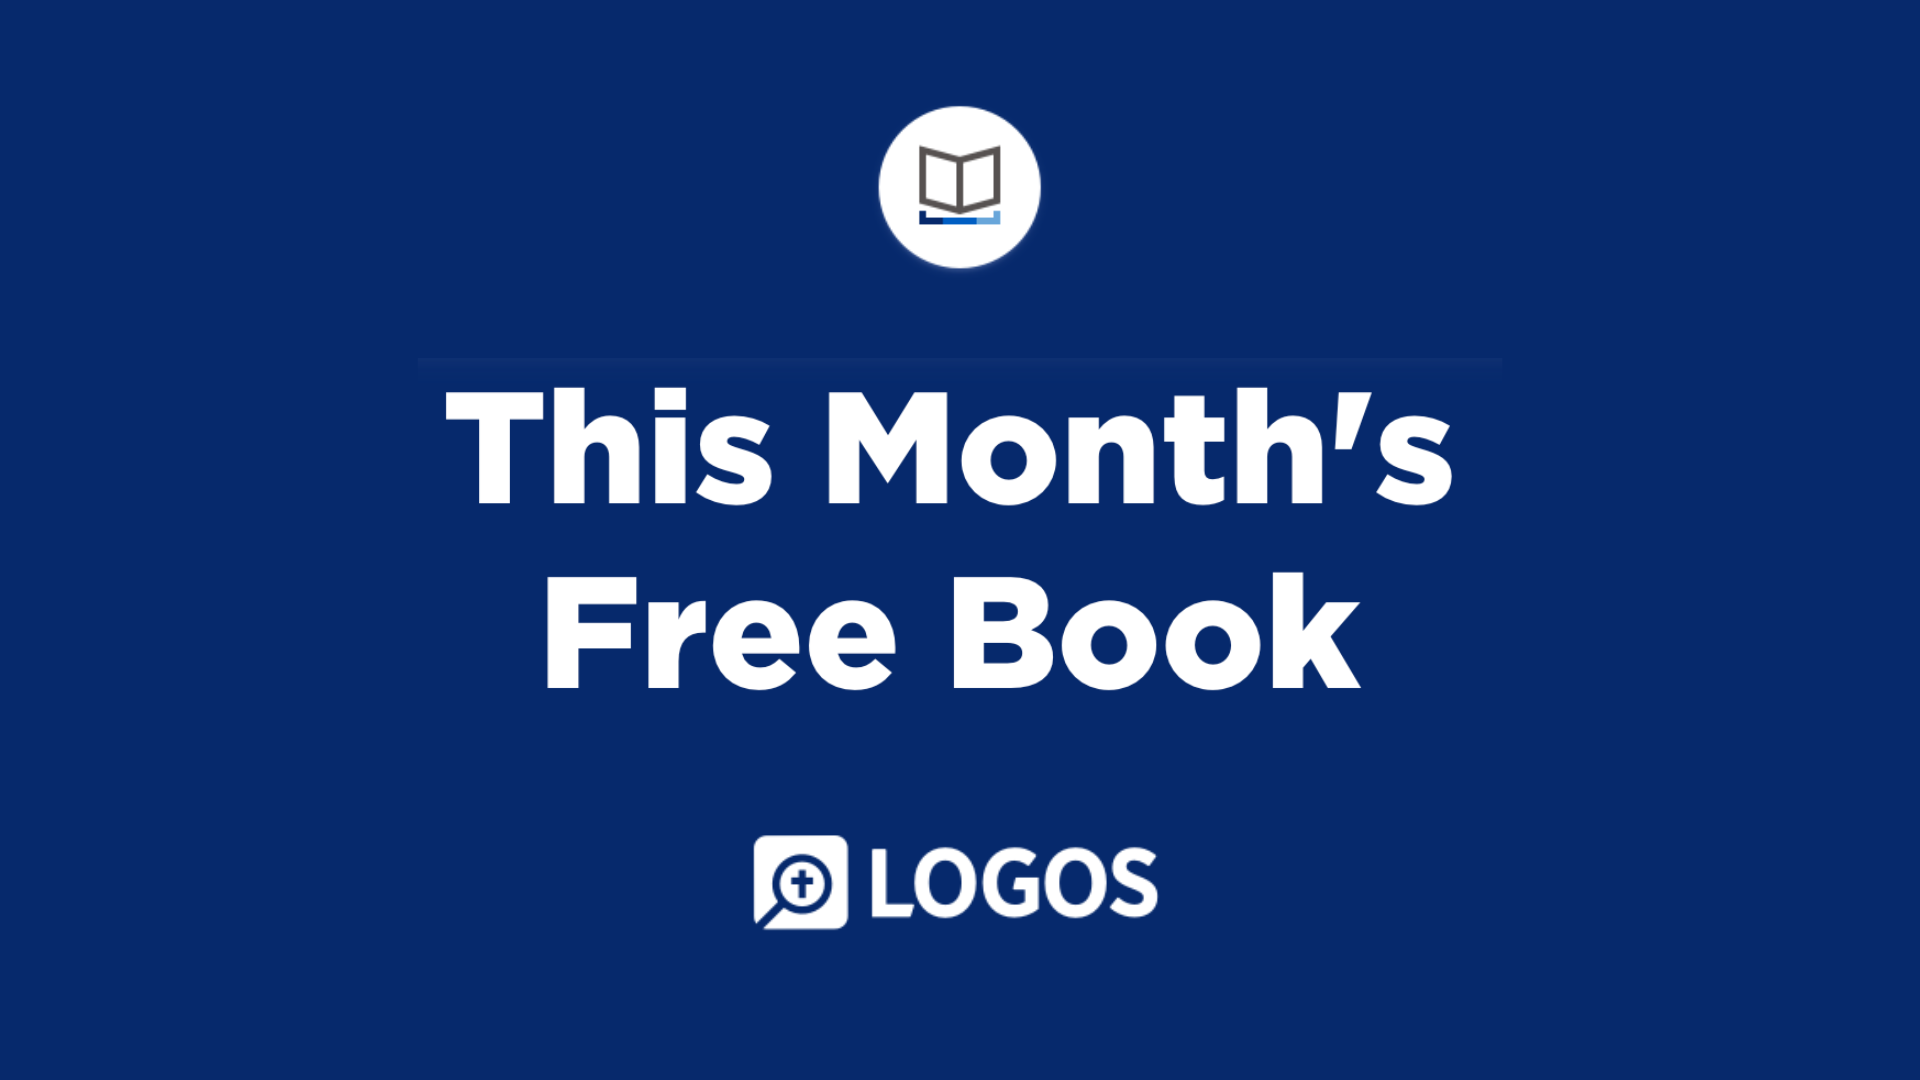 Free Books of the Month and a Quick Check for Other Free Books